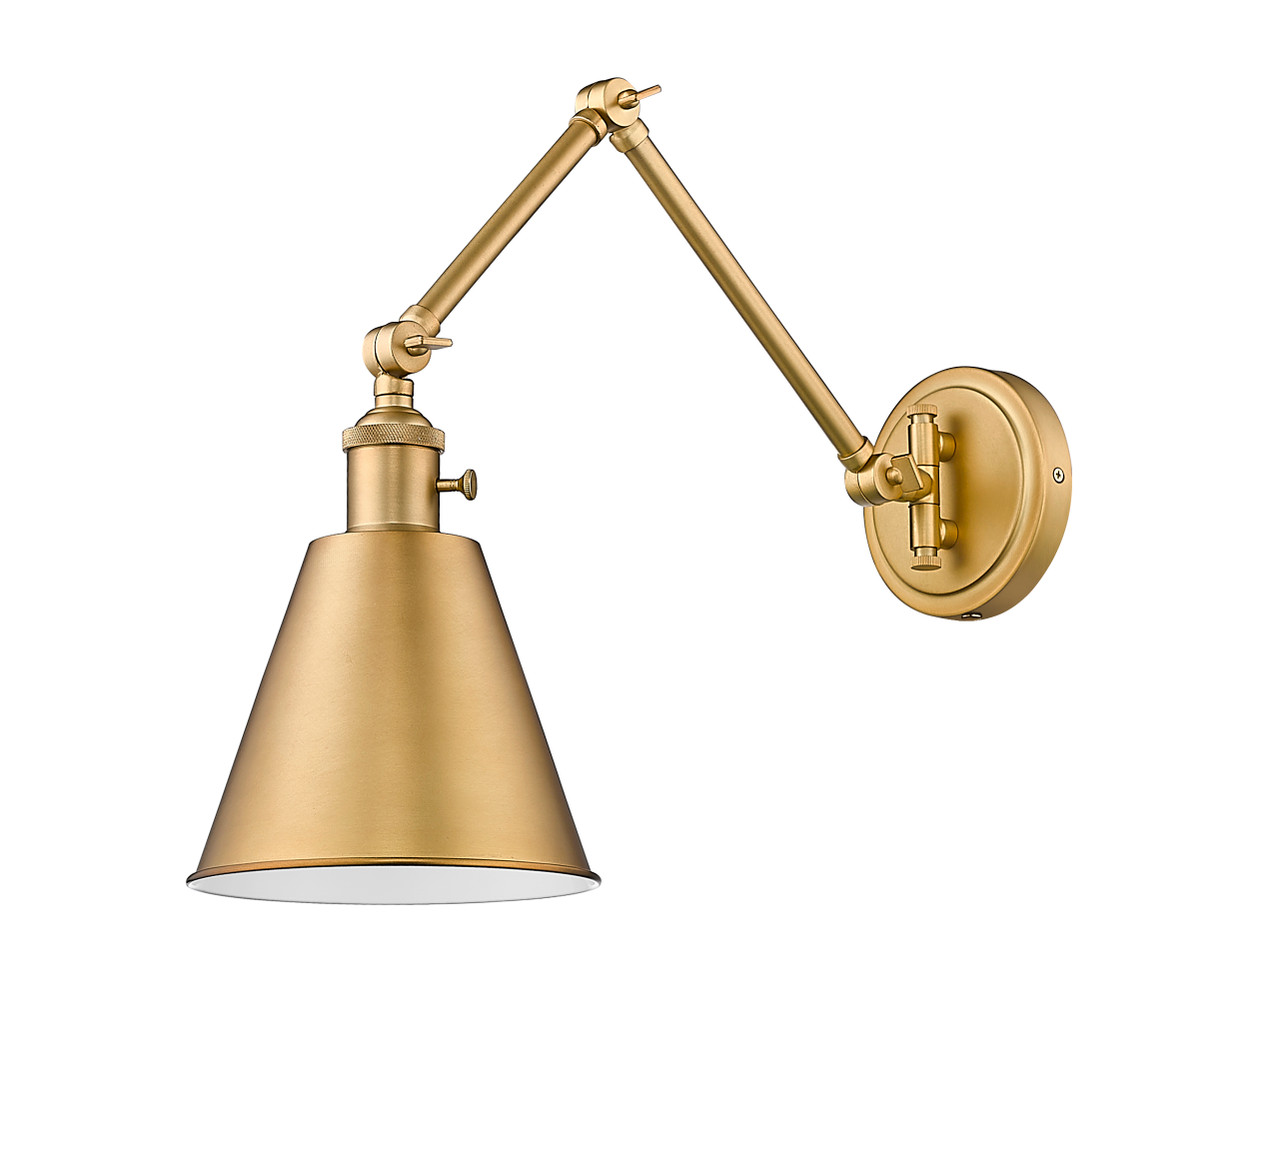 Z-LITE 349S-RB 1 Light Wall Sconce, Rubbed Brass